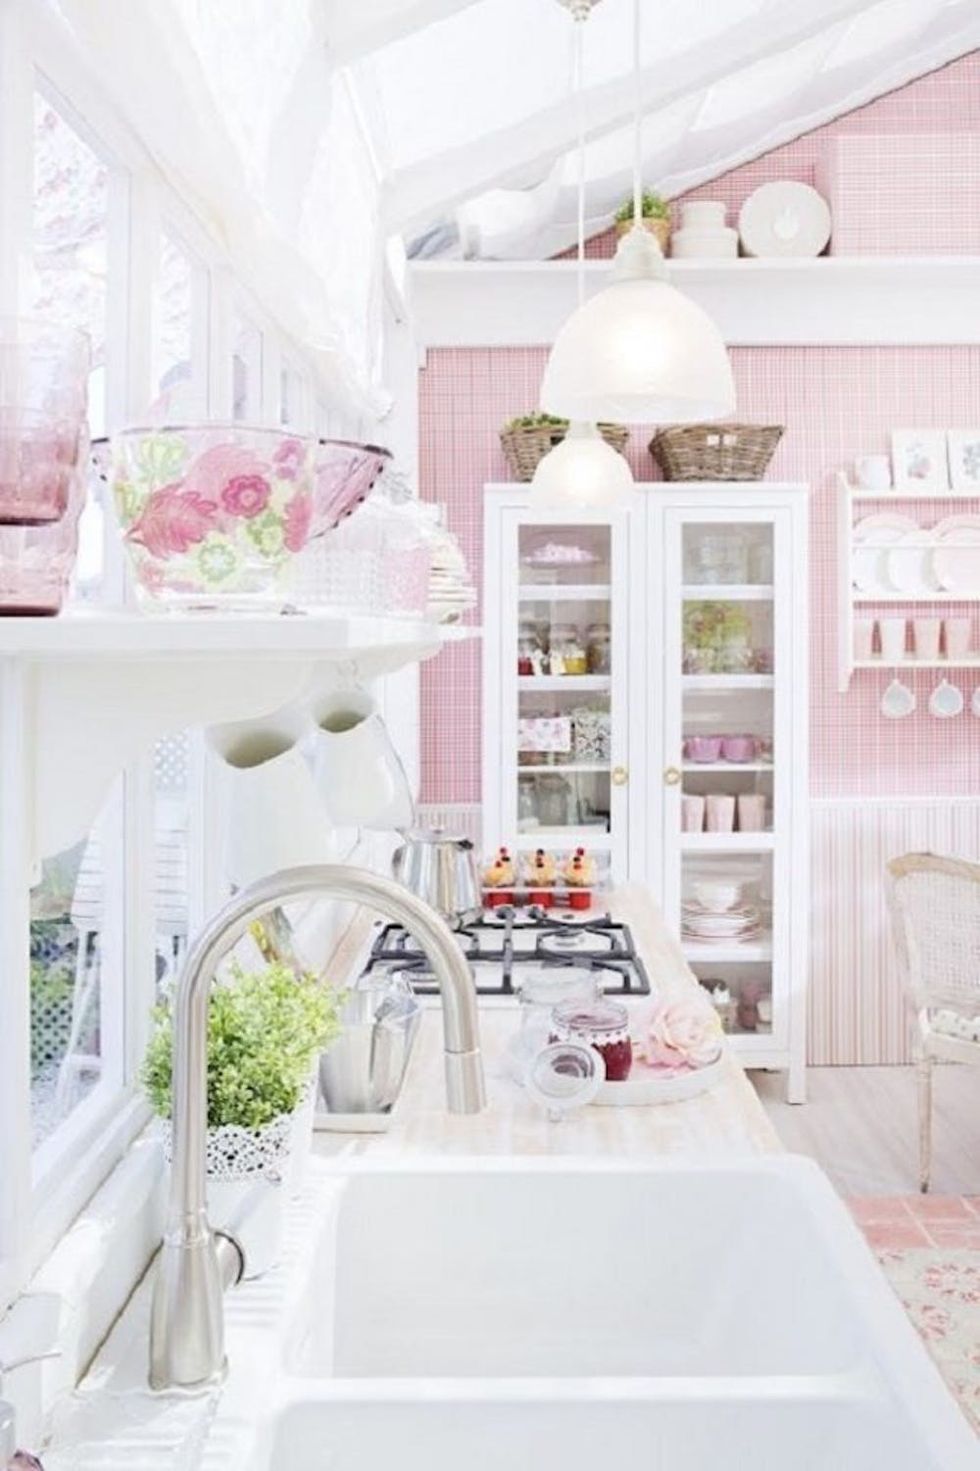 10 Kate Spade New York-Inspired Kitchens You’ll Want to Do More Than ...